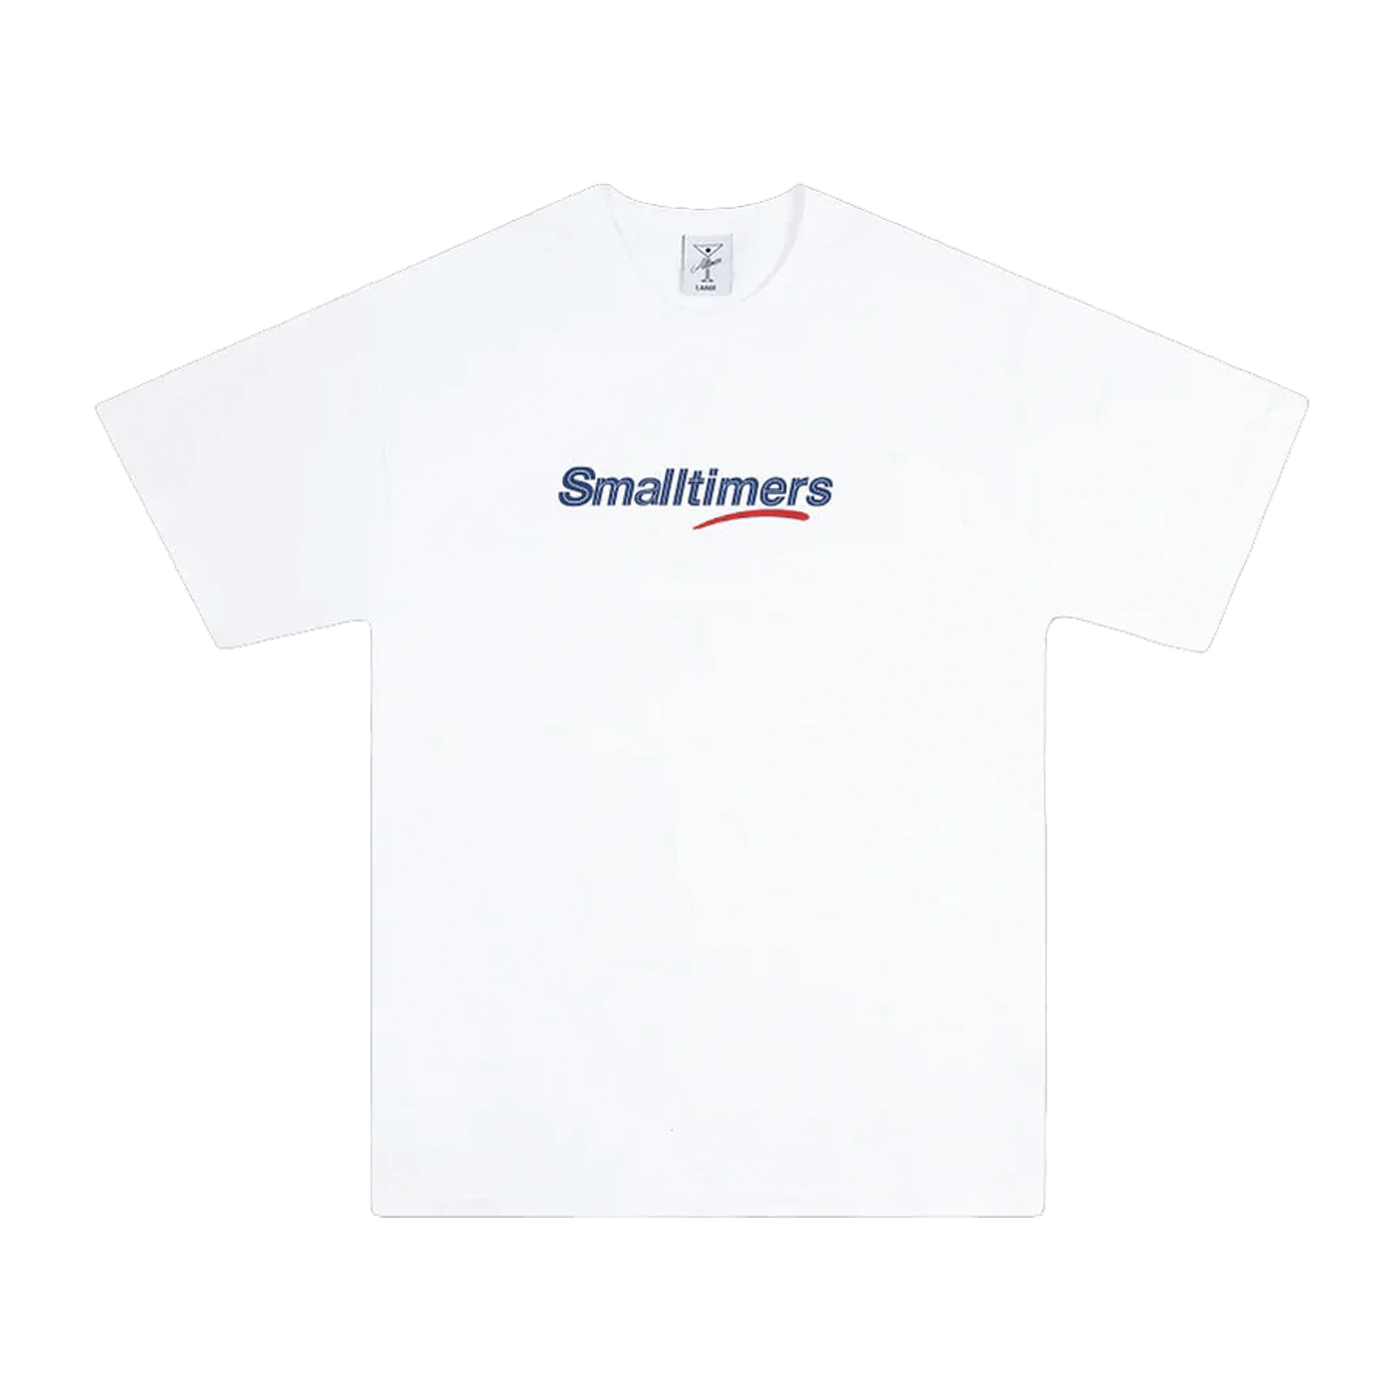 Alltimers Smalltimers Tee White